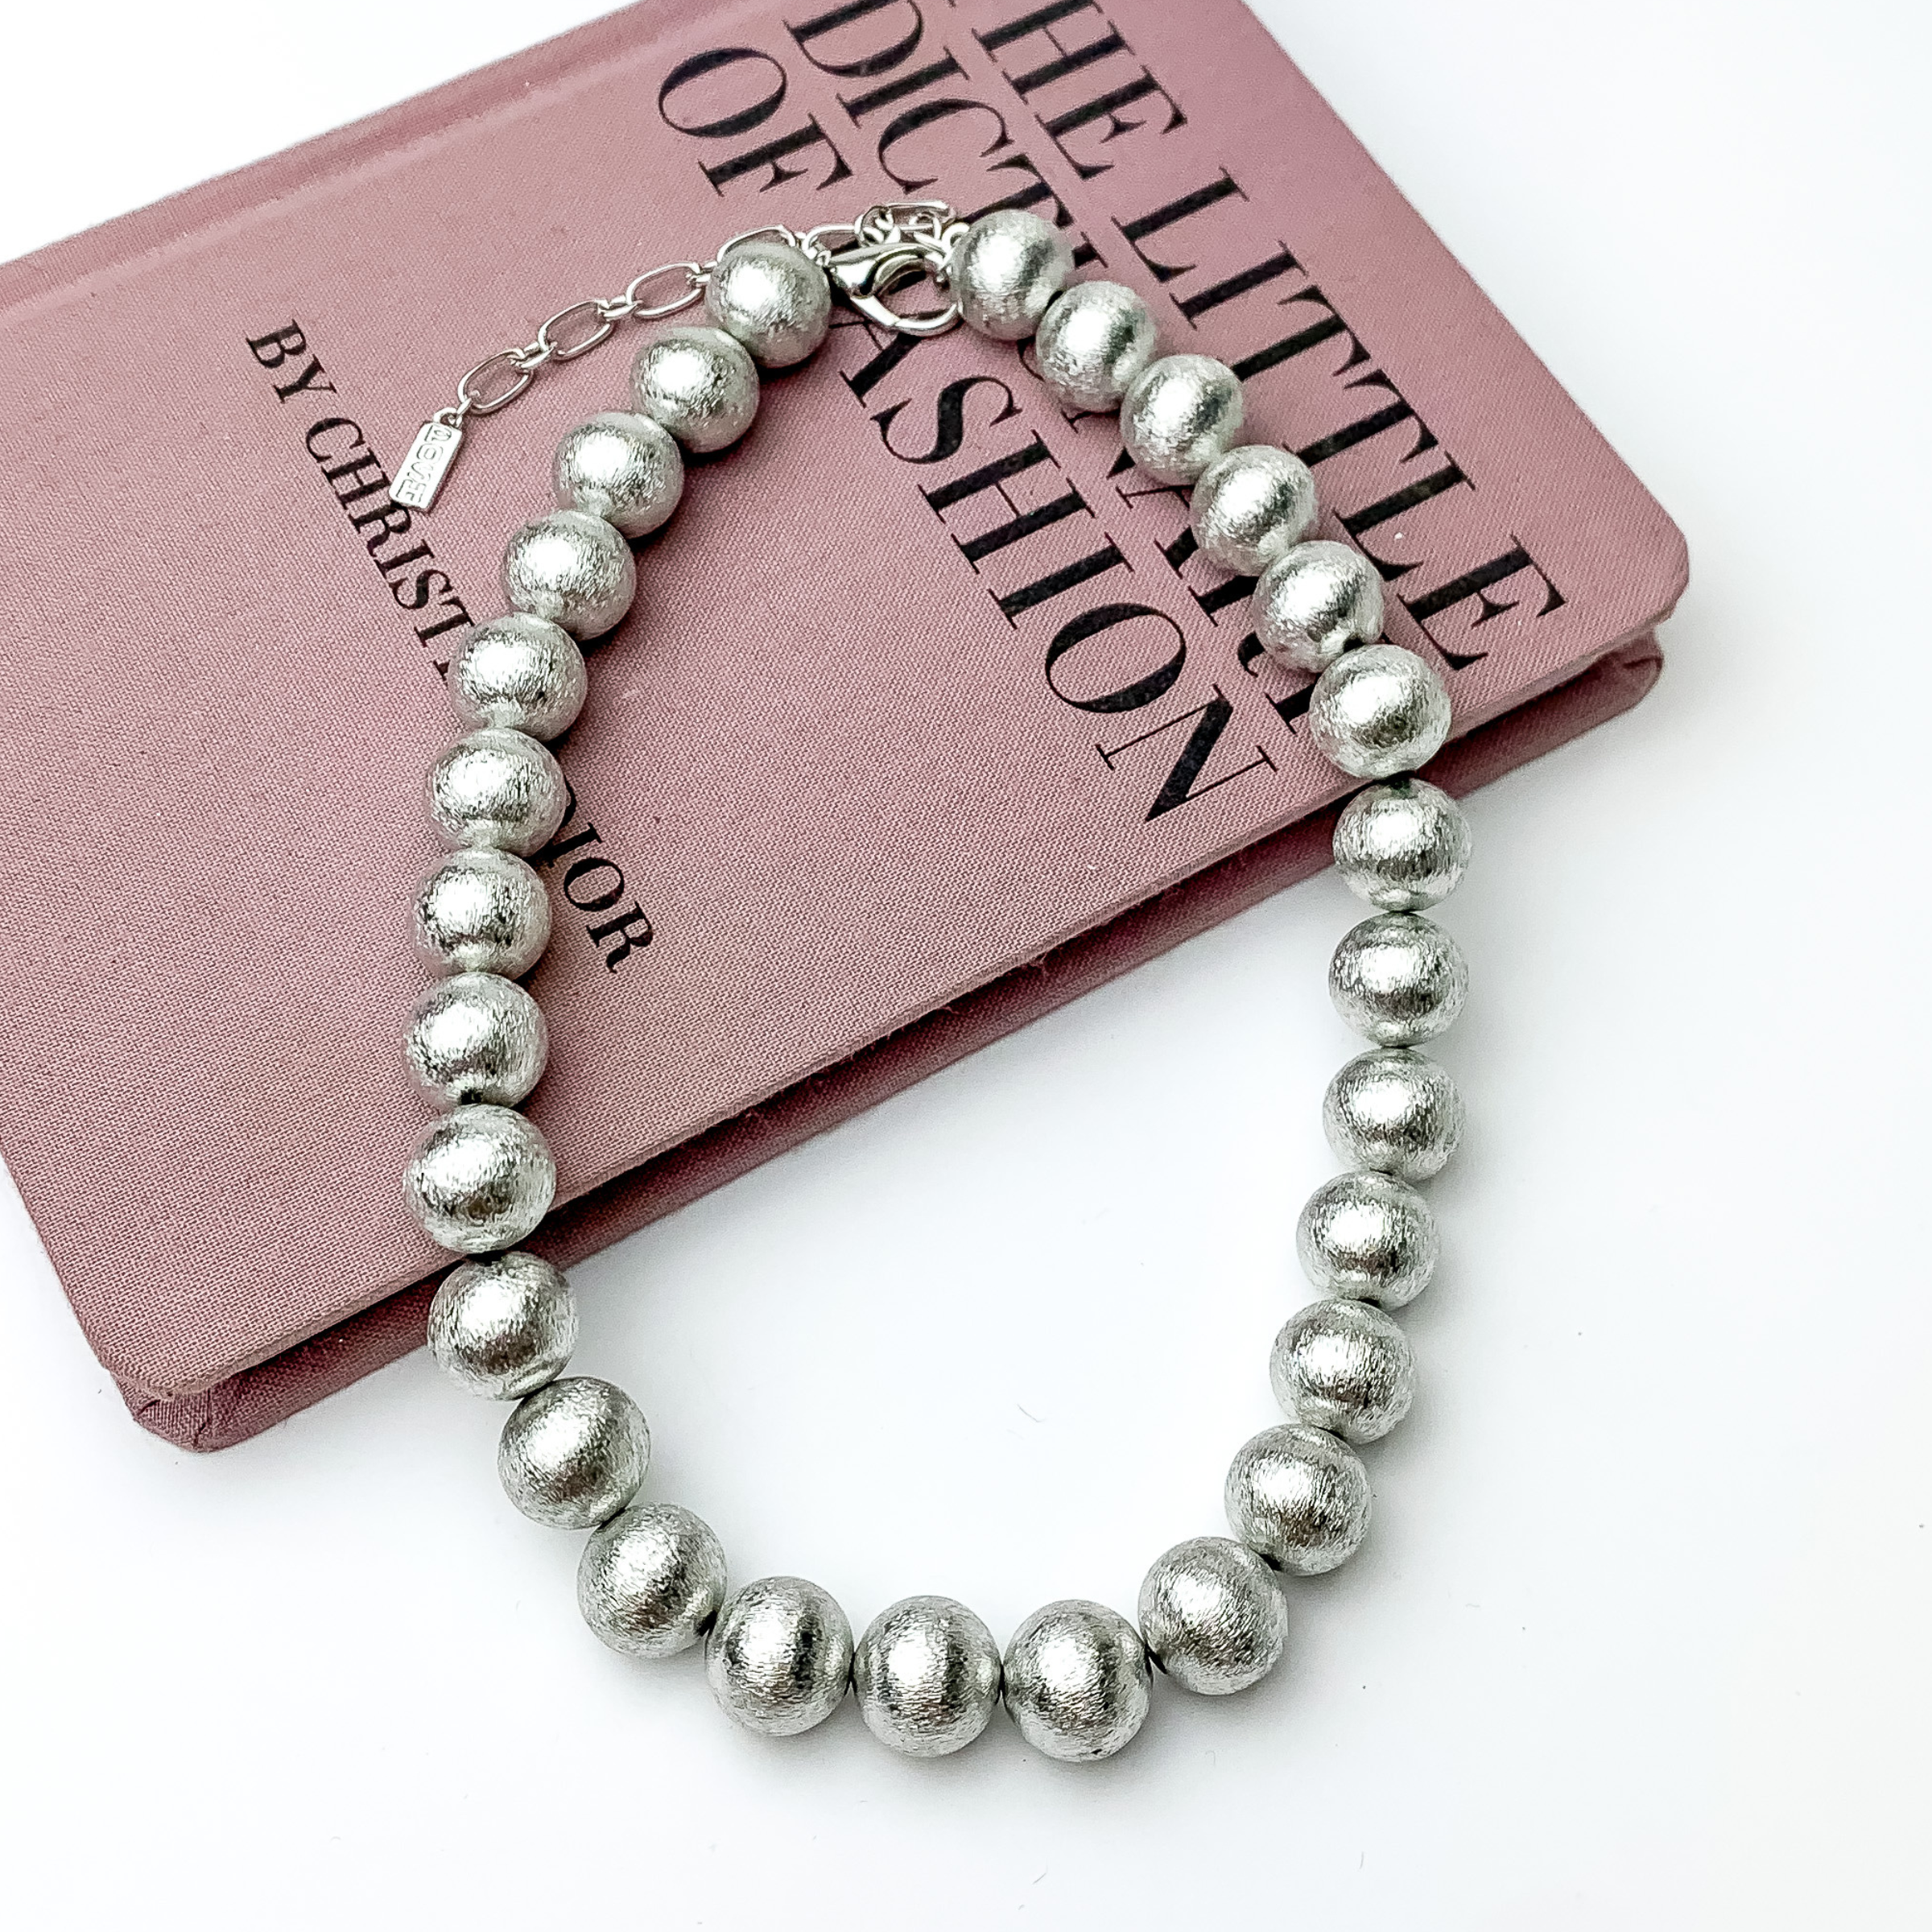 Silver beaded necklace pictured laying partially on a mauve book on a white background.